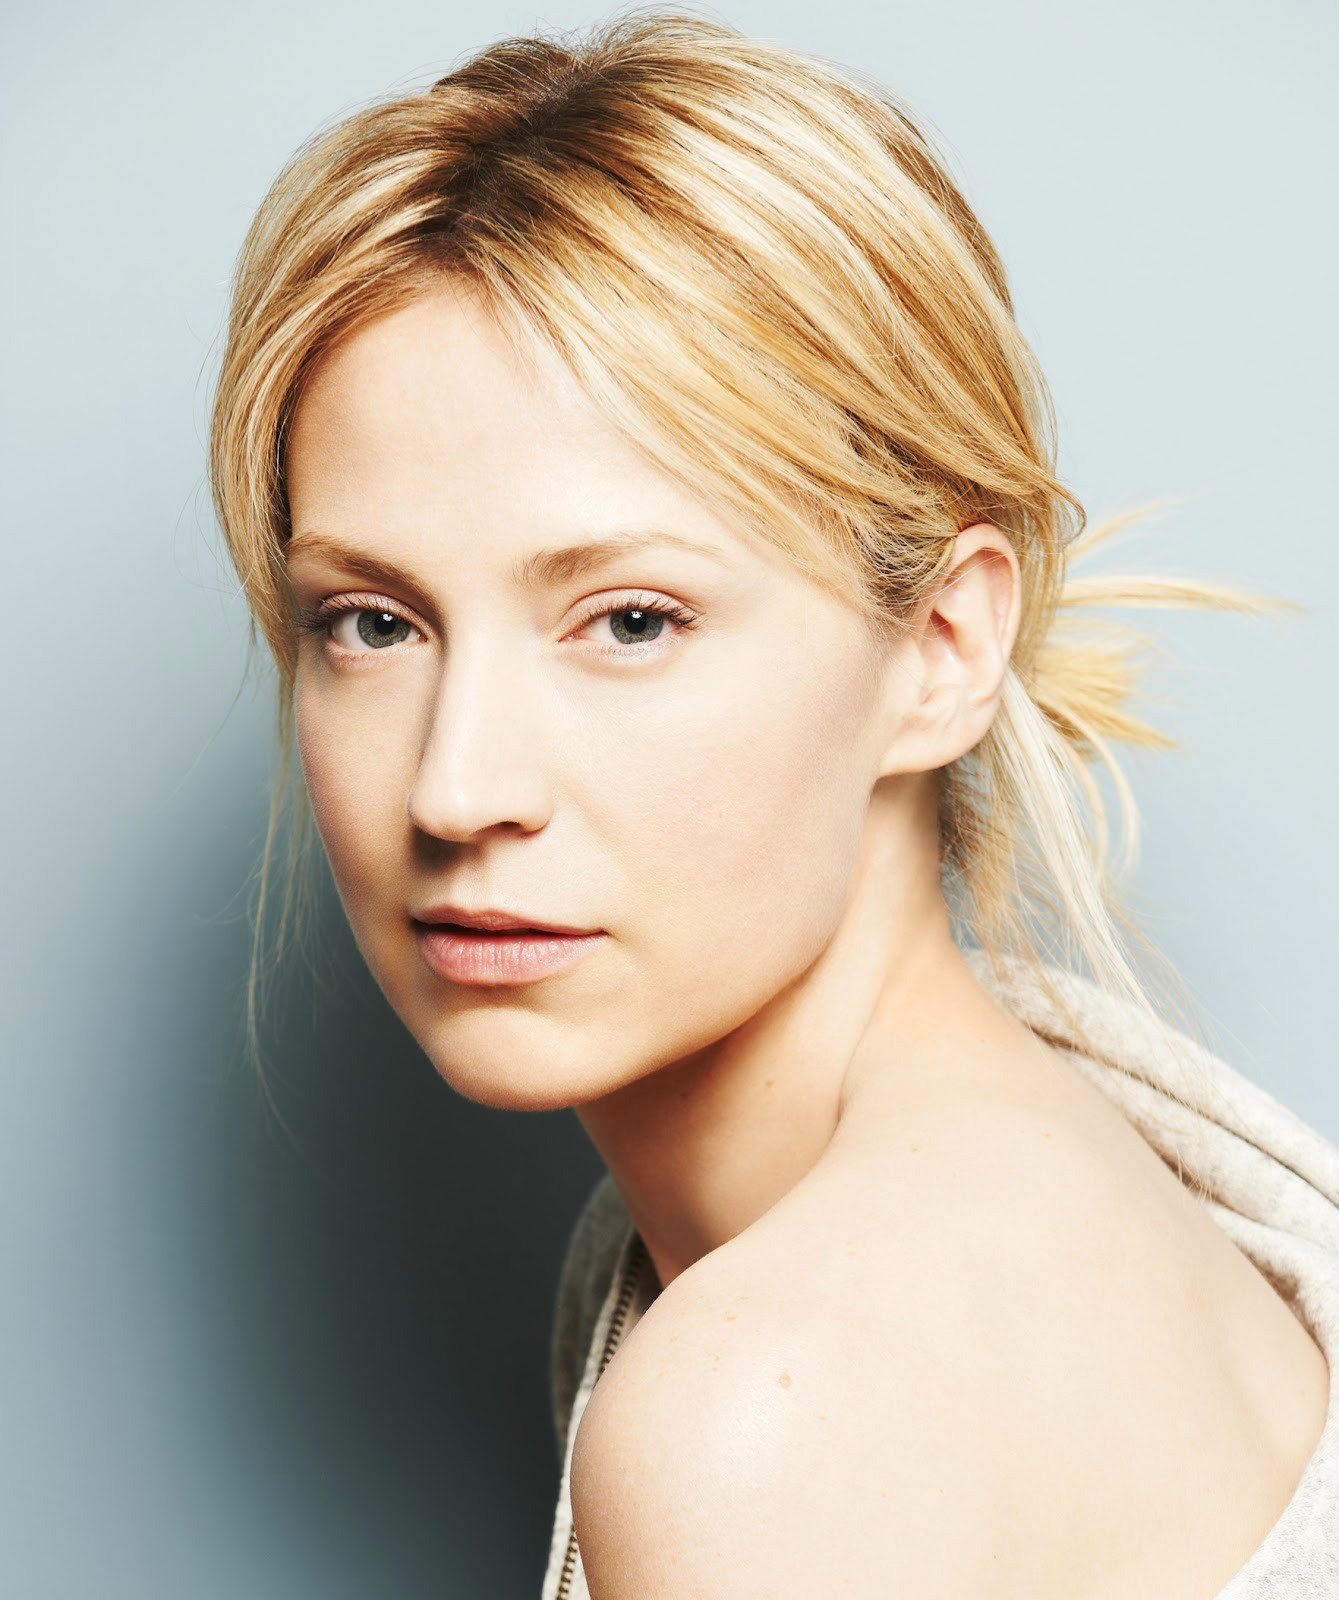 Beth Riesgraf Wallpapers